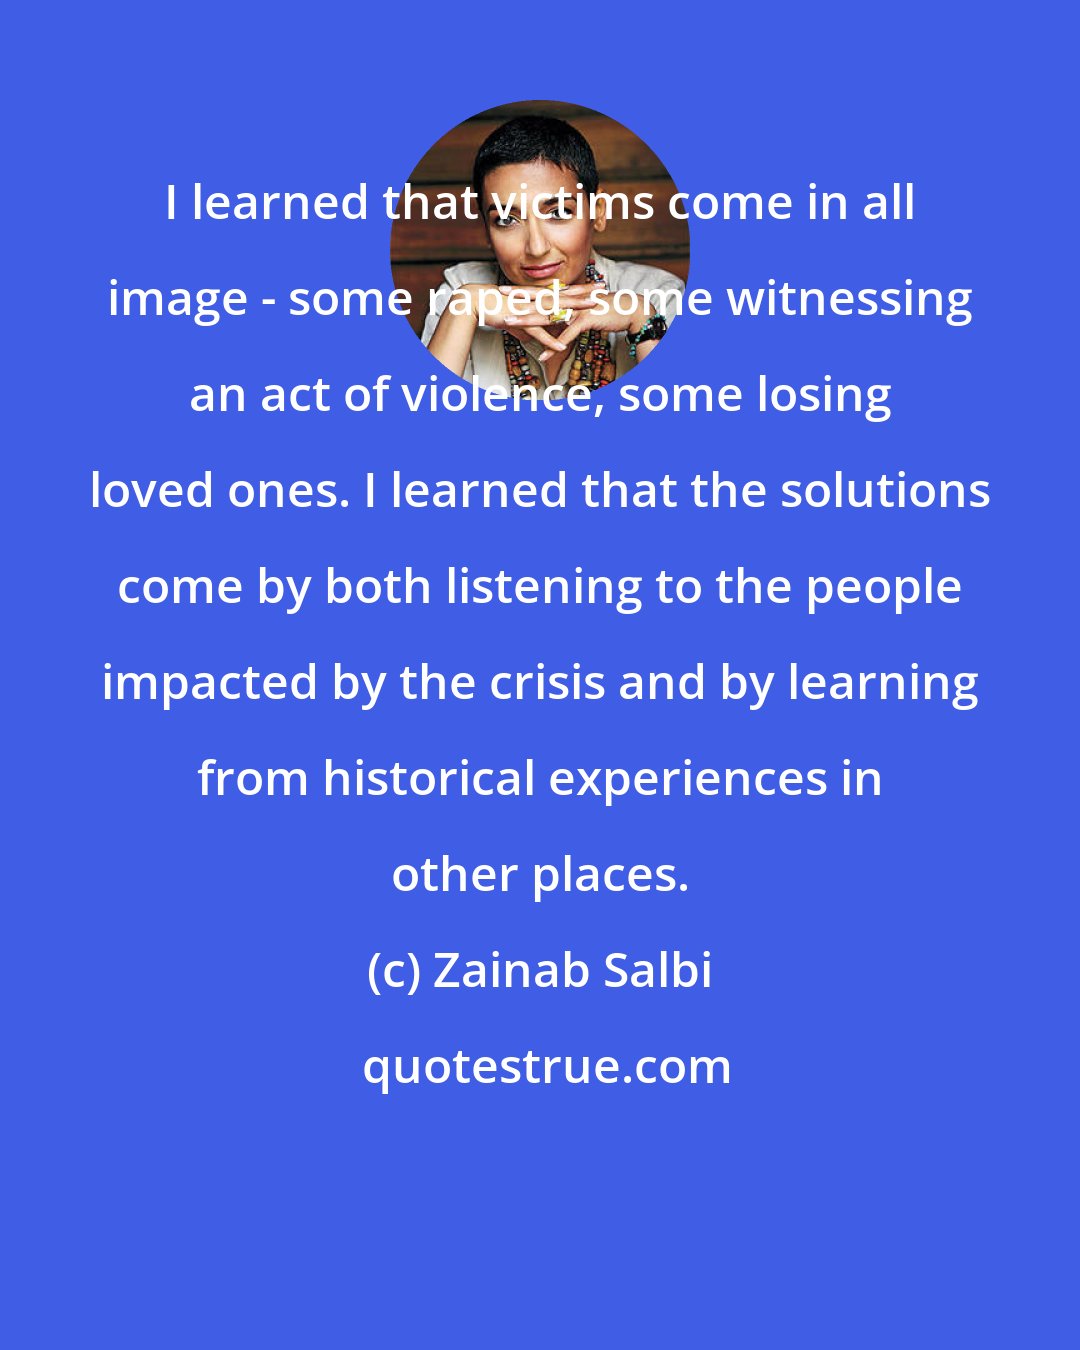 Zainab Salbi: I learned that victims come in all image - some raped, some witnessing an act of violence, some losing loved ones. I learned that the solutions come by both listening to the people impacted by the crisis and by learning from historical experiences in other places.